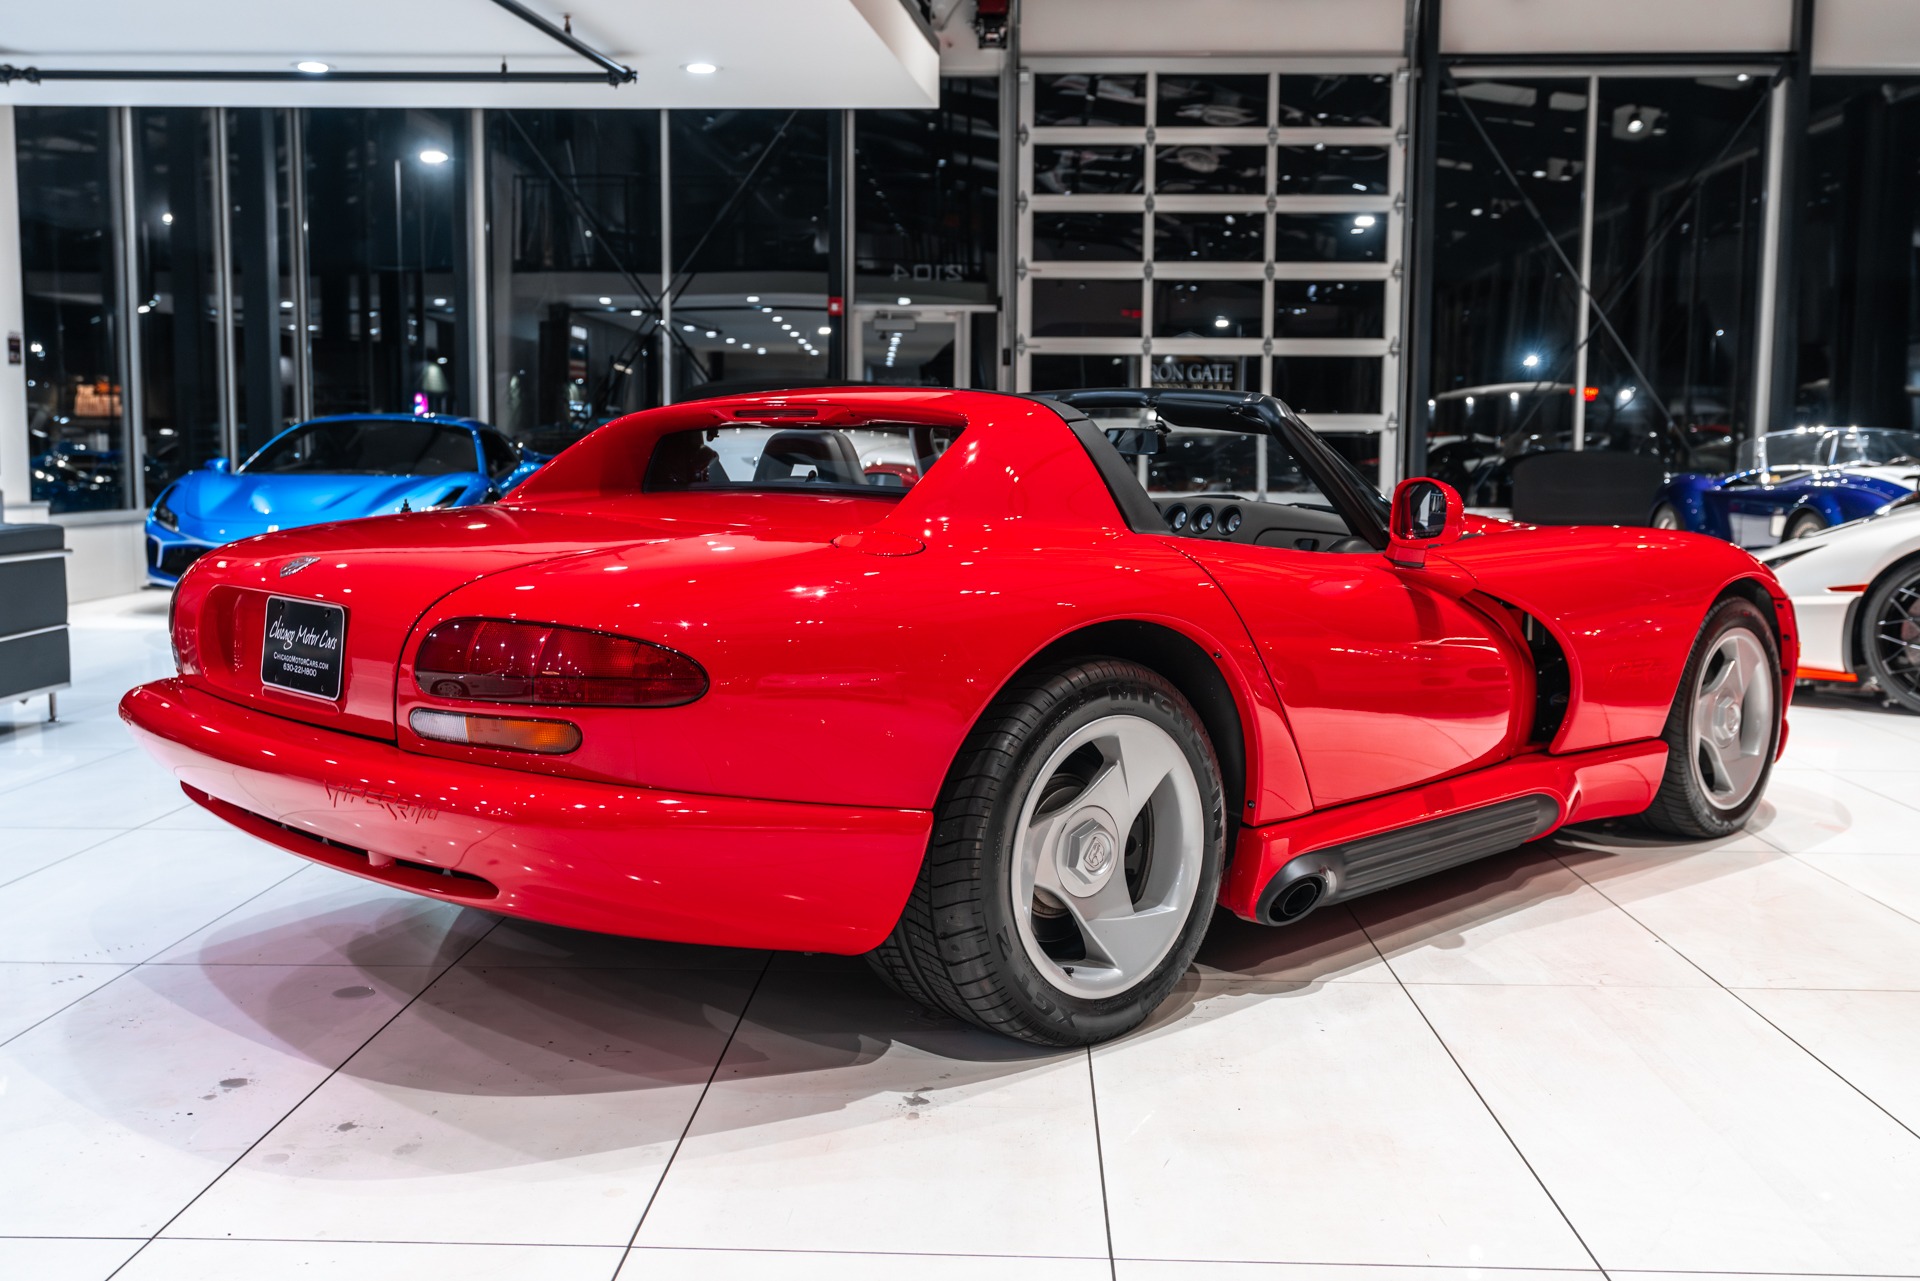 Used-1993-Dodge-Viper-RT10-Convertible-Collector-Condition-6-Speed-Manual-Only-1923-Miles